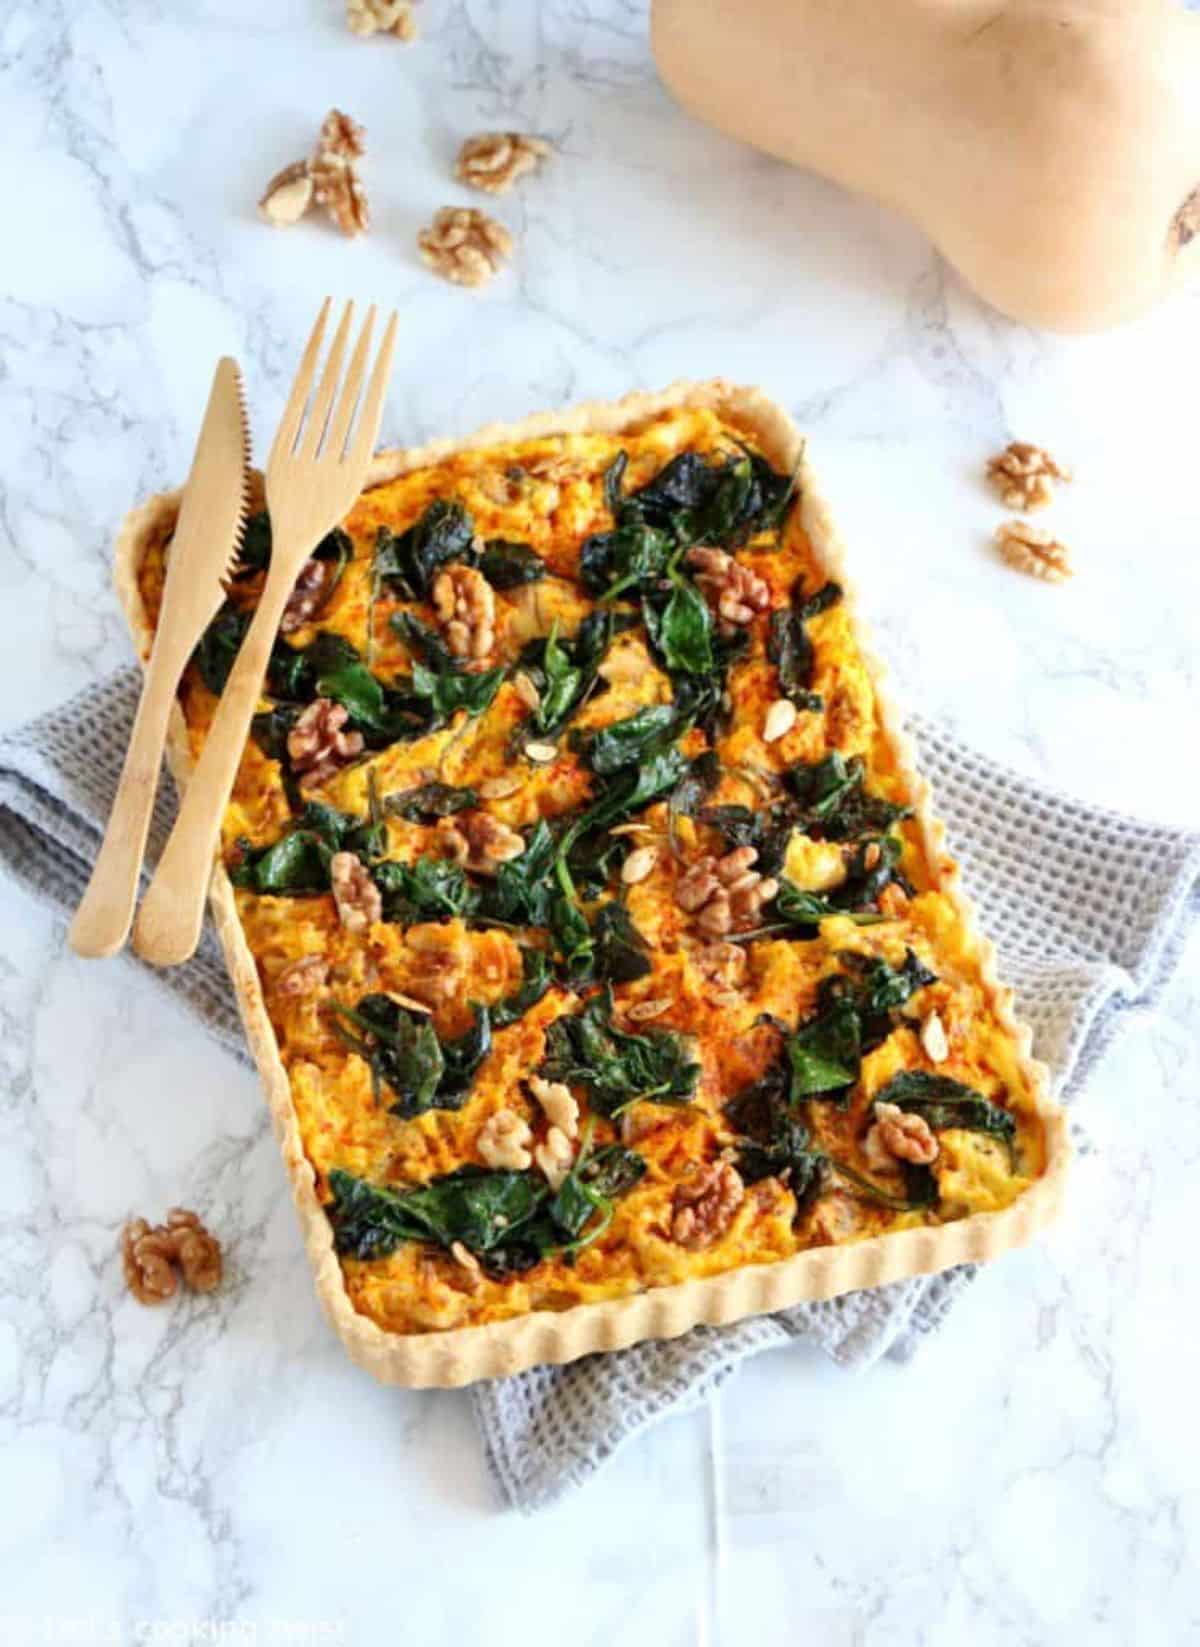 Mouth-watering pumpkin, spinach, and goat cheese quiche on a countertop.